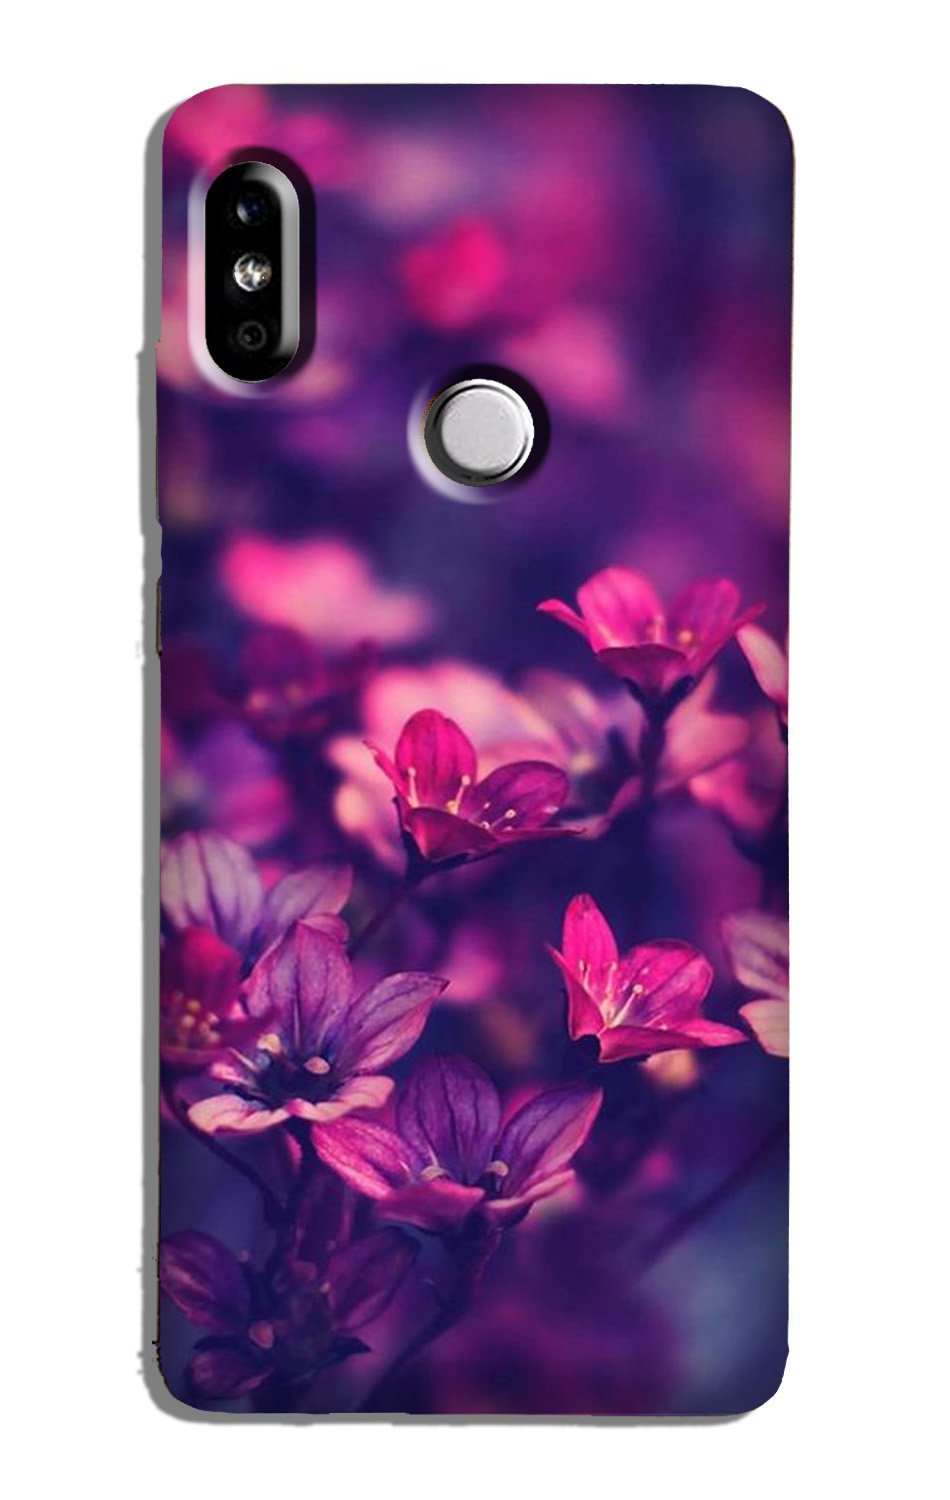 flowers Case for Redmi Note 5 Pro